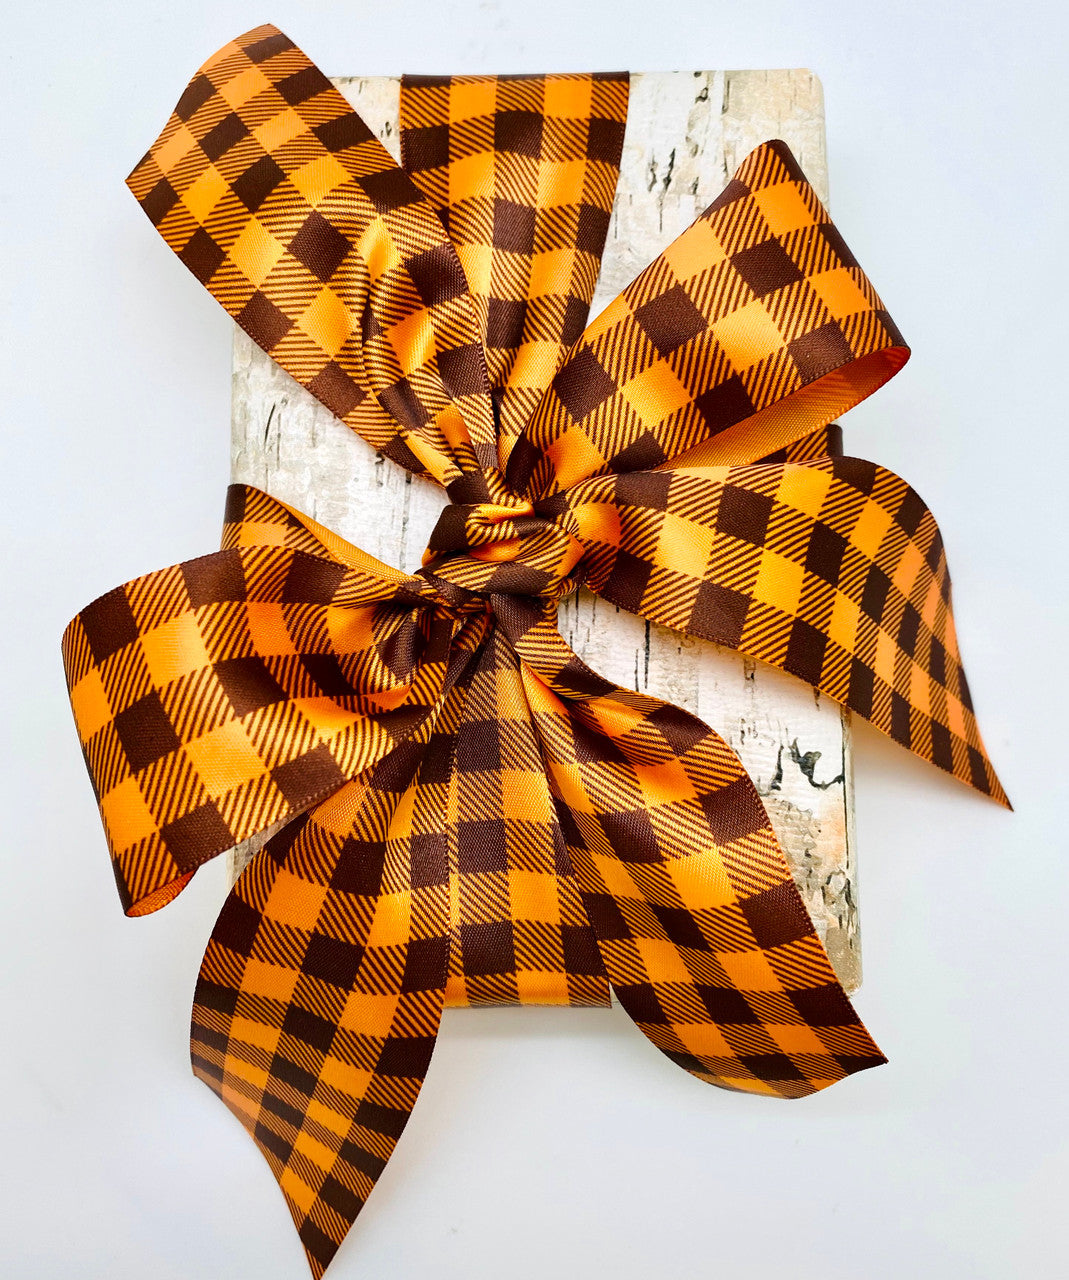 A beautiful bow makes any gift extra special! Be sure to have this ribbon on hand for hostess gifts and gift baskets for all those Fall gatherings!